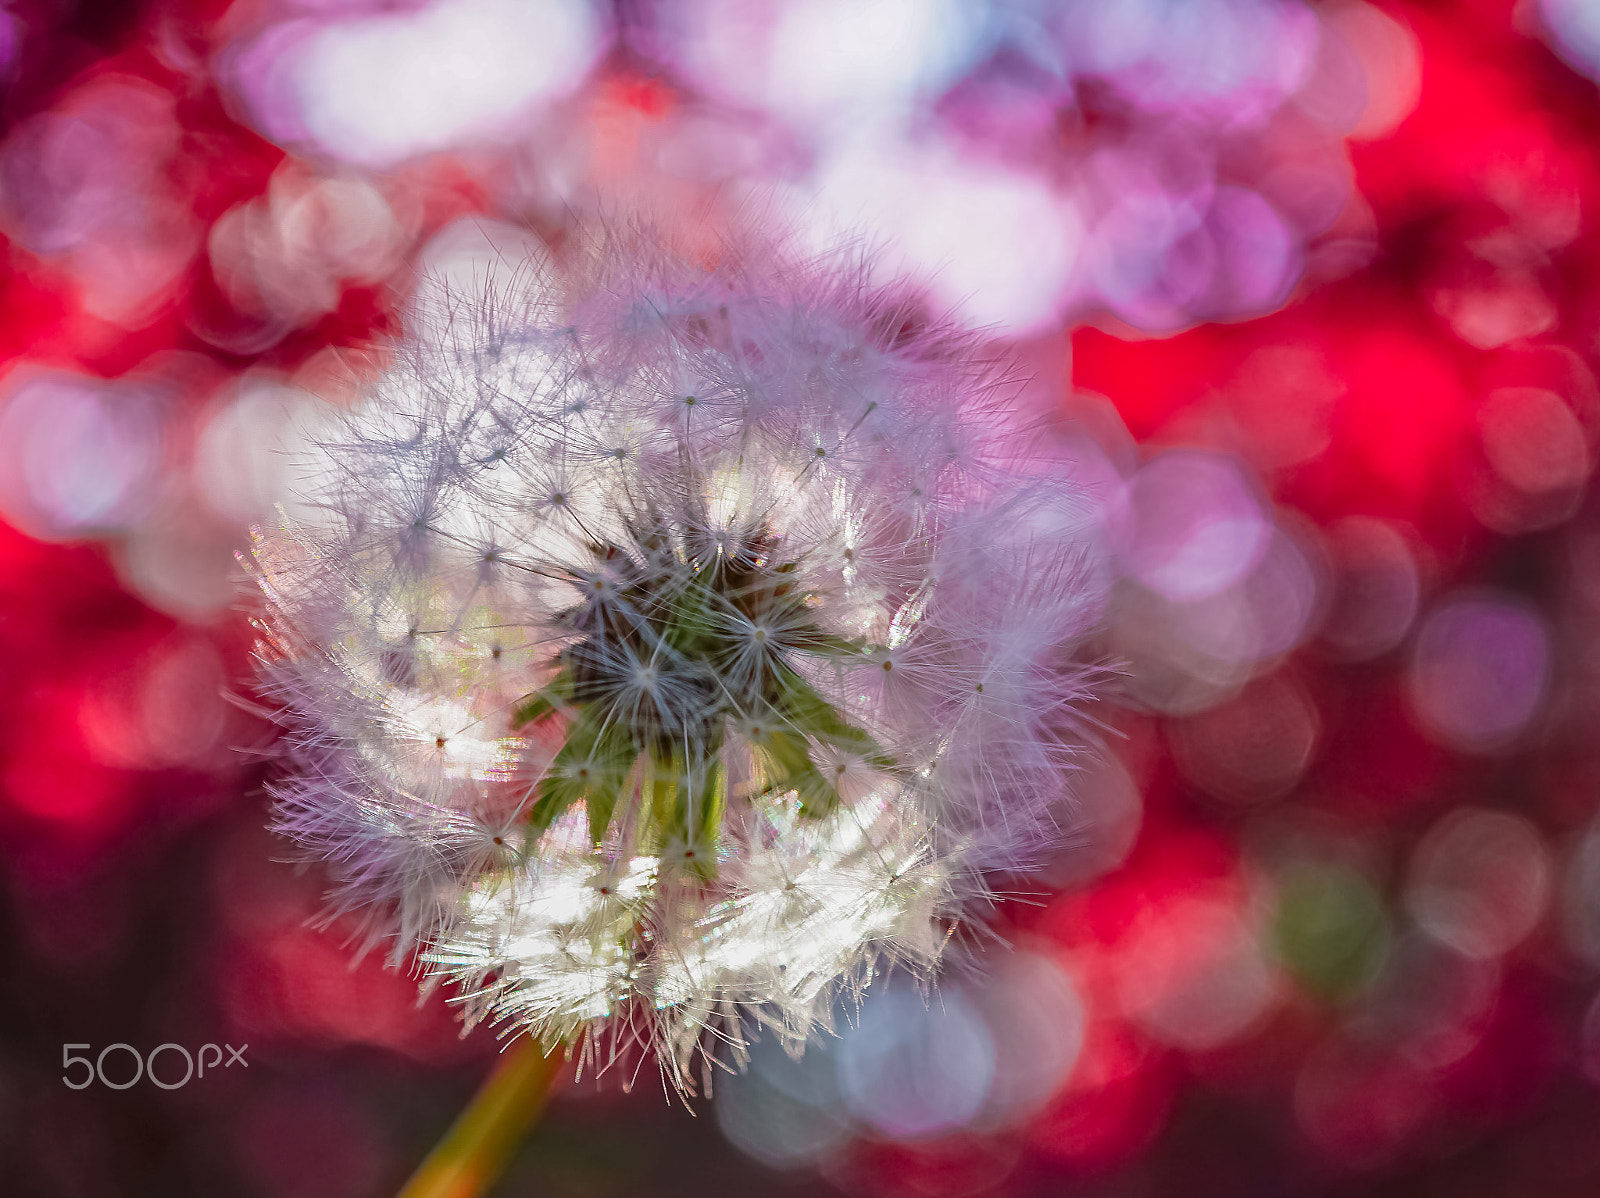 Sony E 30mm F3.5 Macro sample photo. Dandelion puffball under red leaves photography